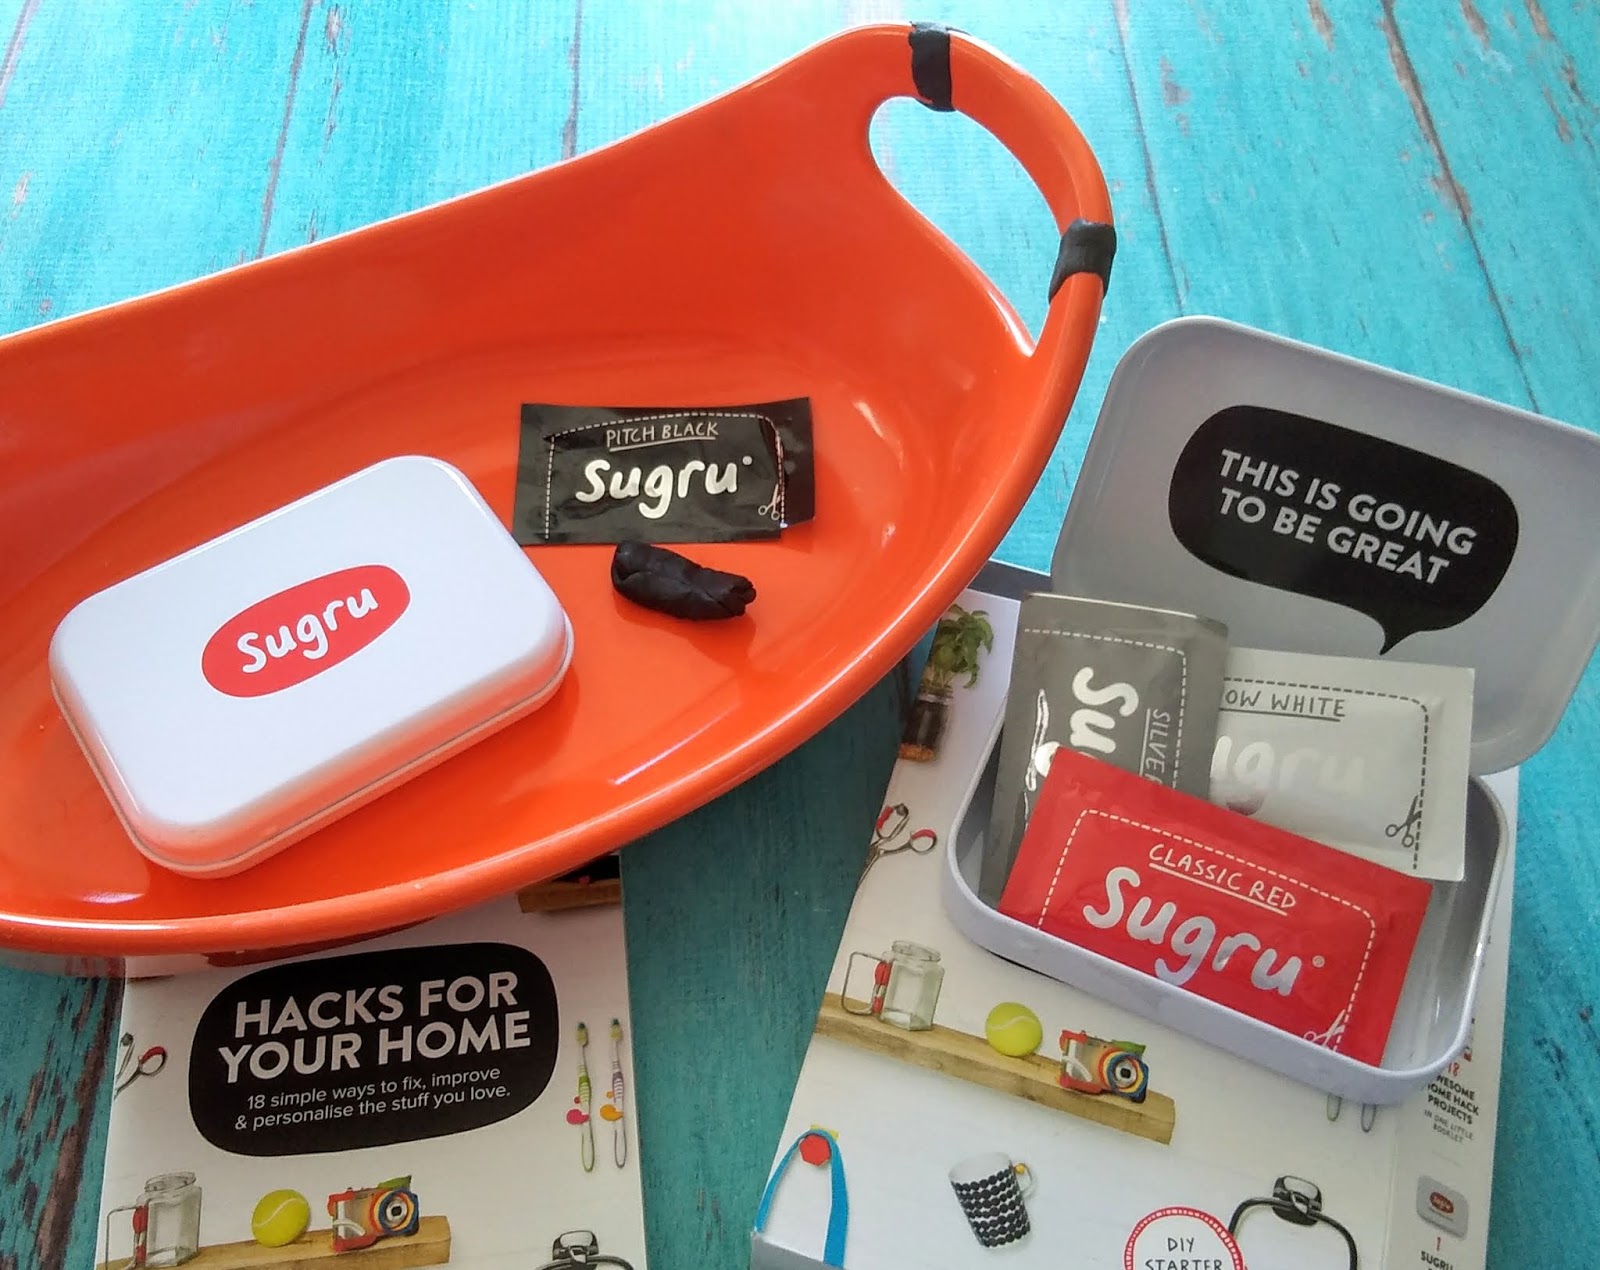 Sugru Family-Safe Mouldable Glue - Black 3 Pack - PAST DATE SPECIAL